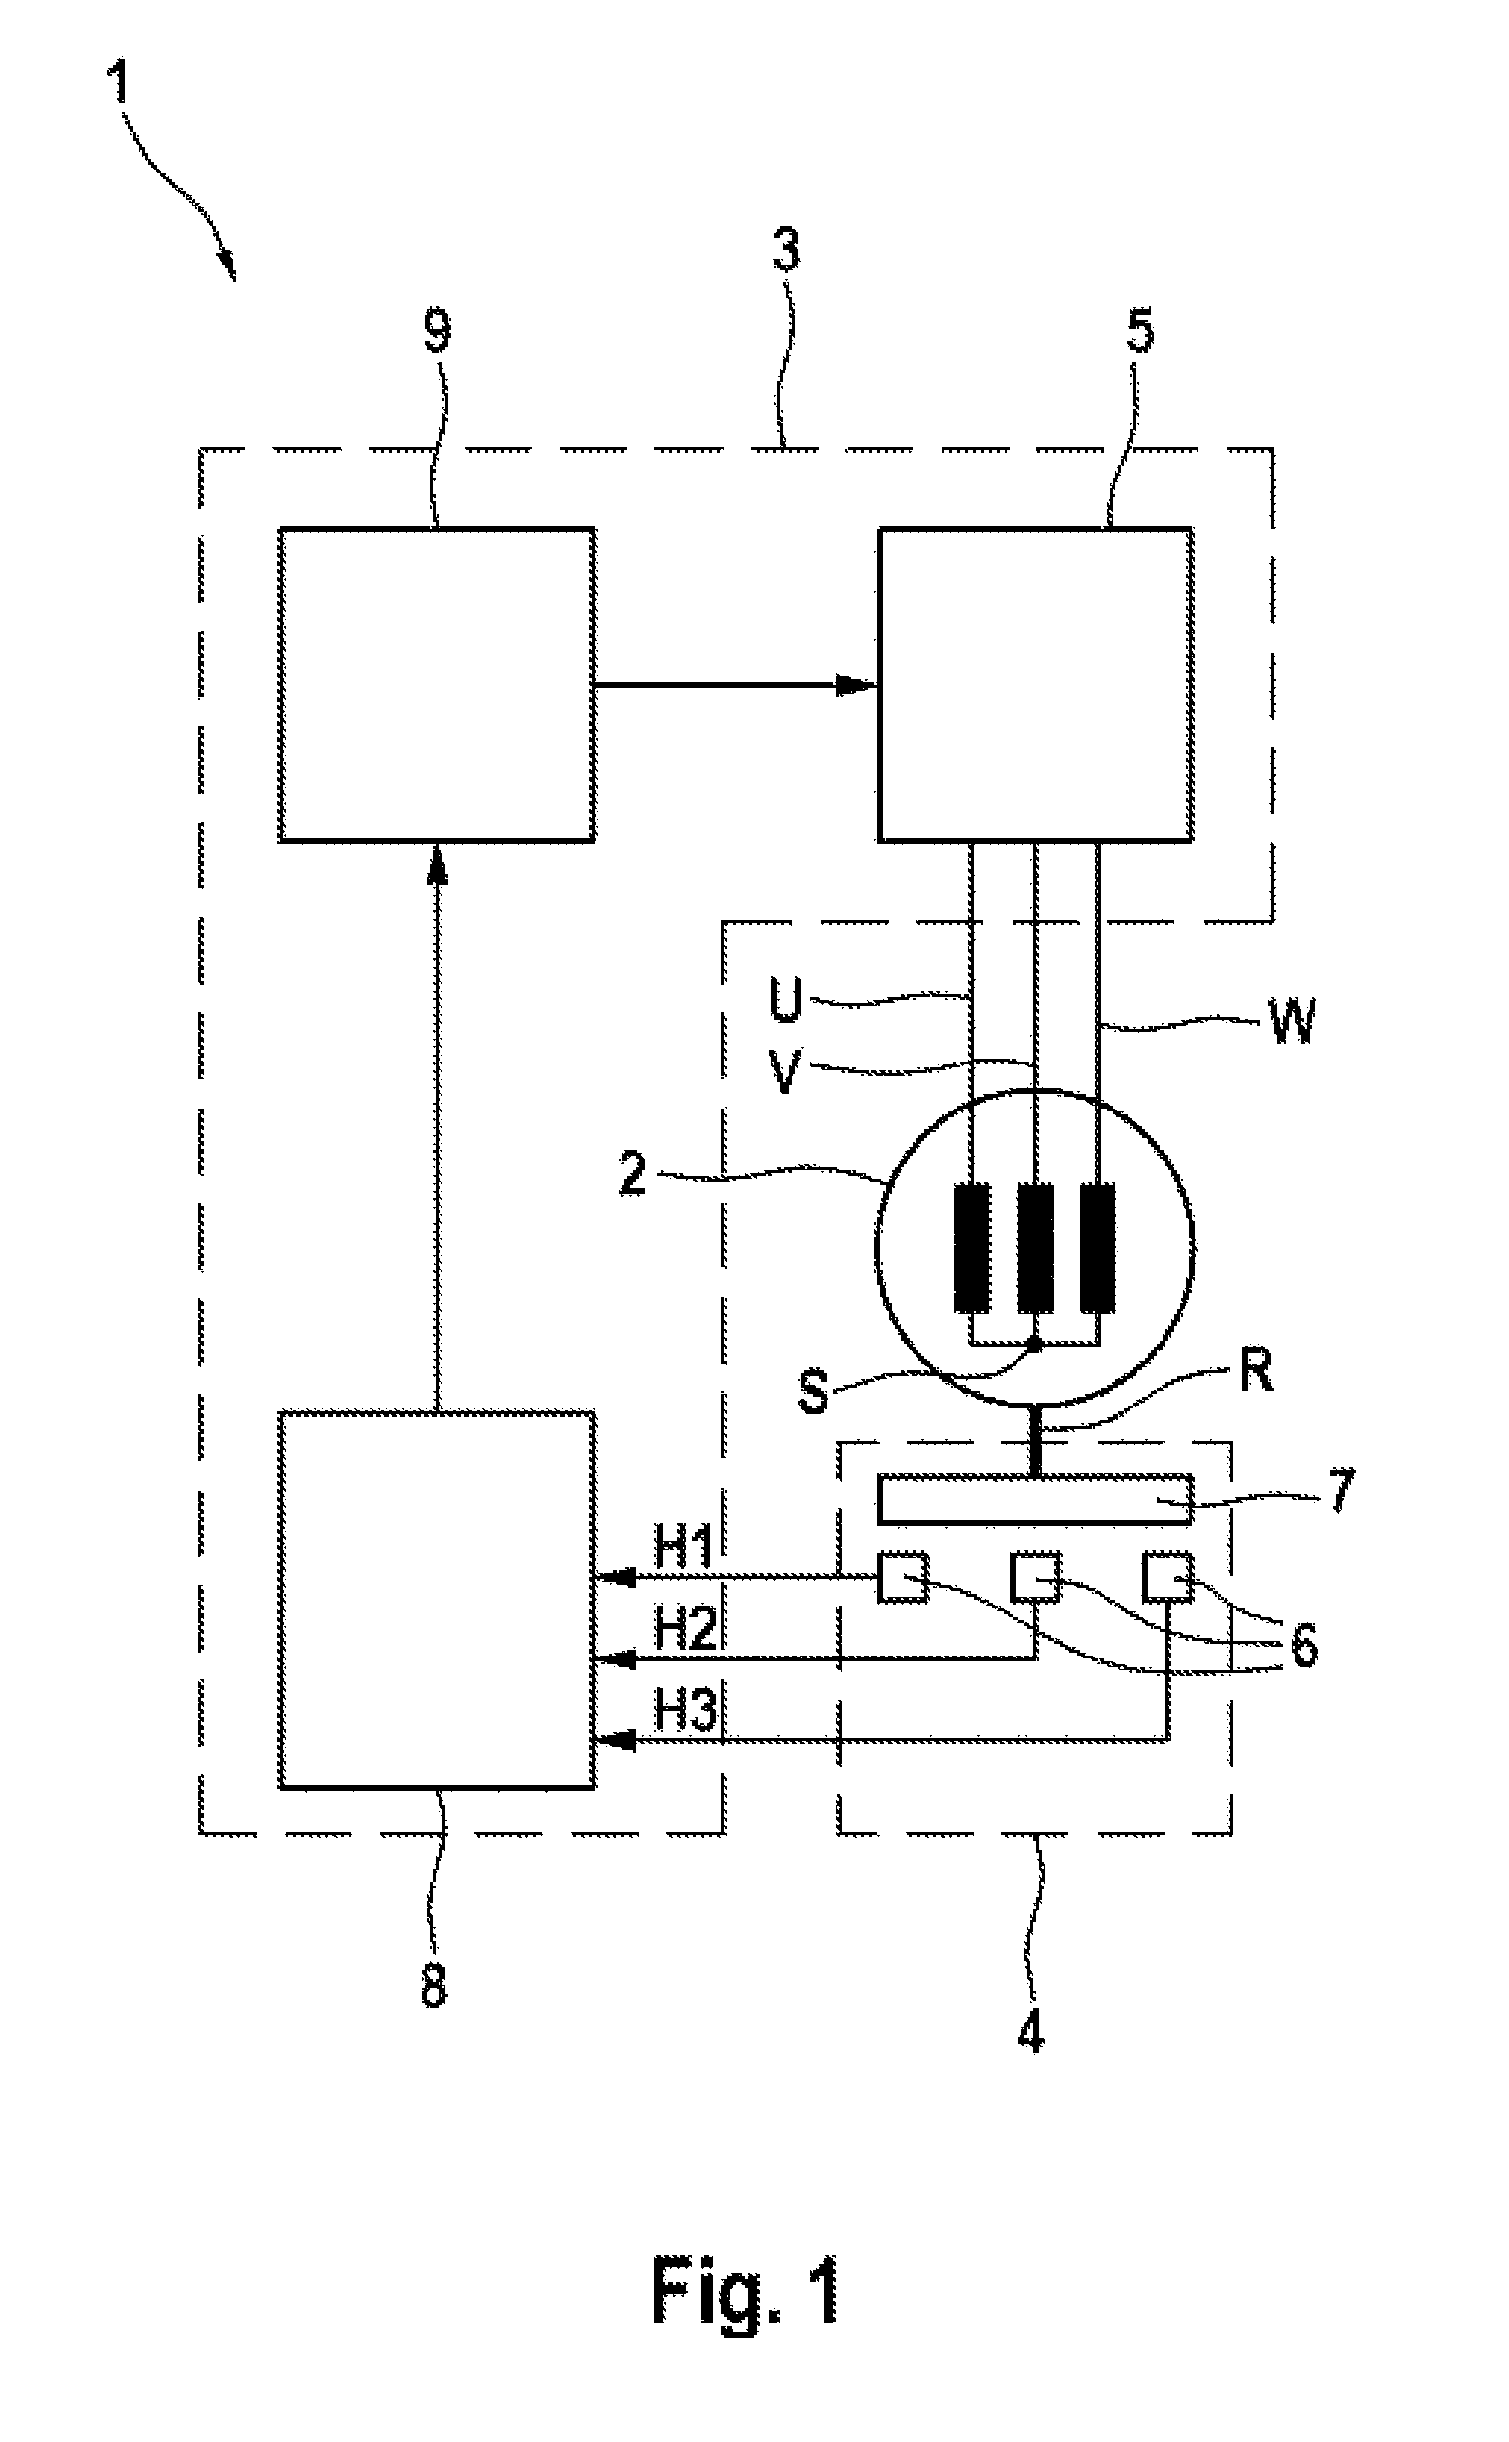 Method and circuit arrangement for checking the rotor position of a synchronous machine